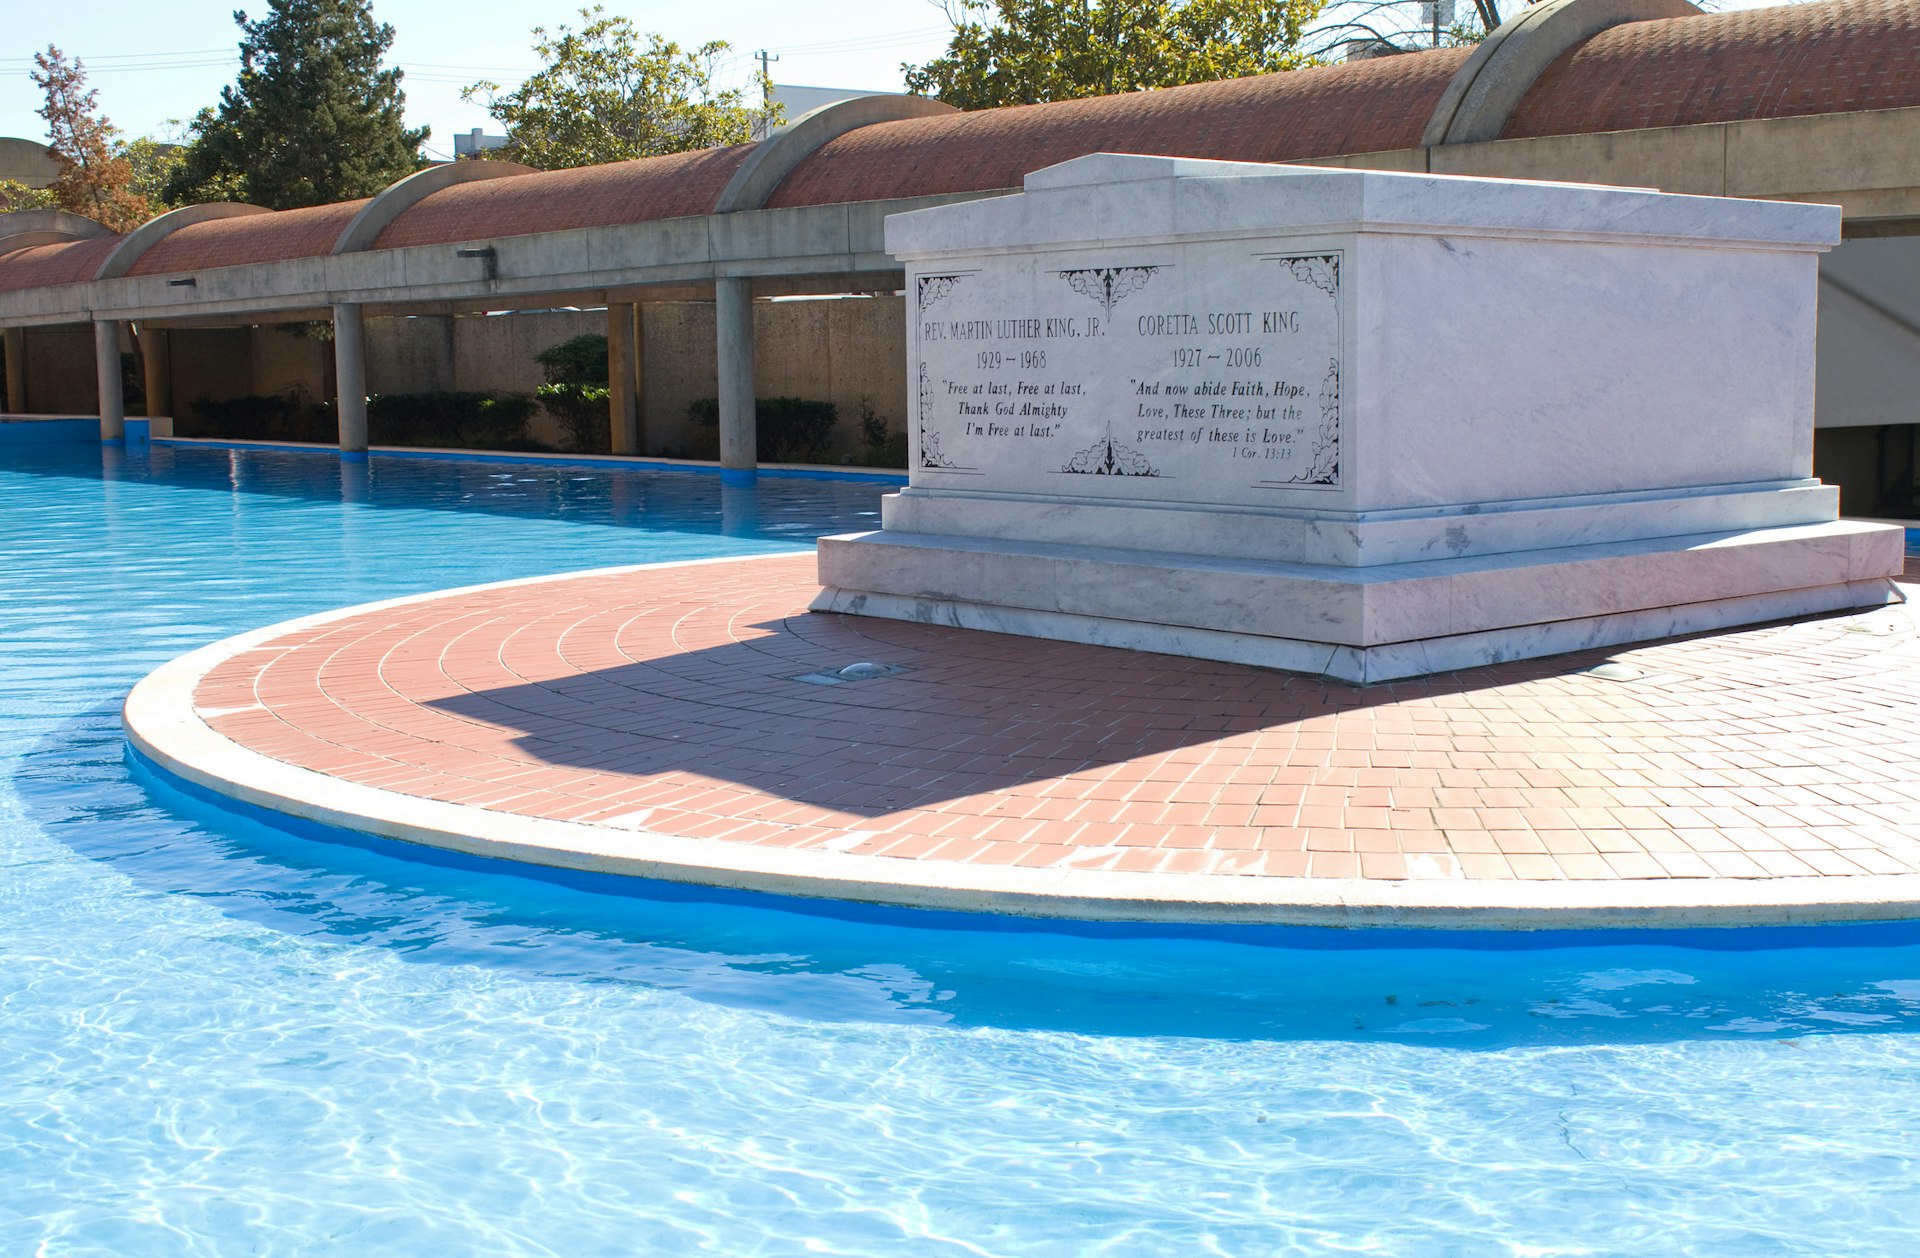 The tomb of Martin Luther King Jr. and Coretta Scott King in the MLK National Historical Park